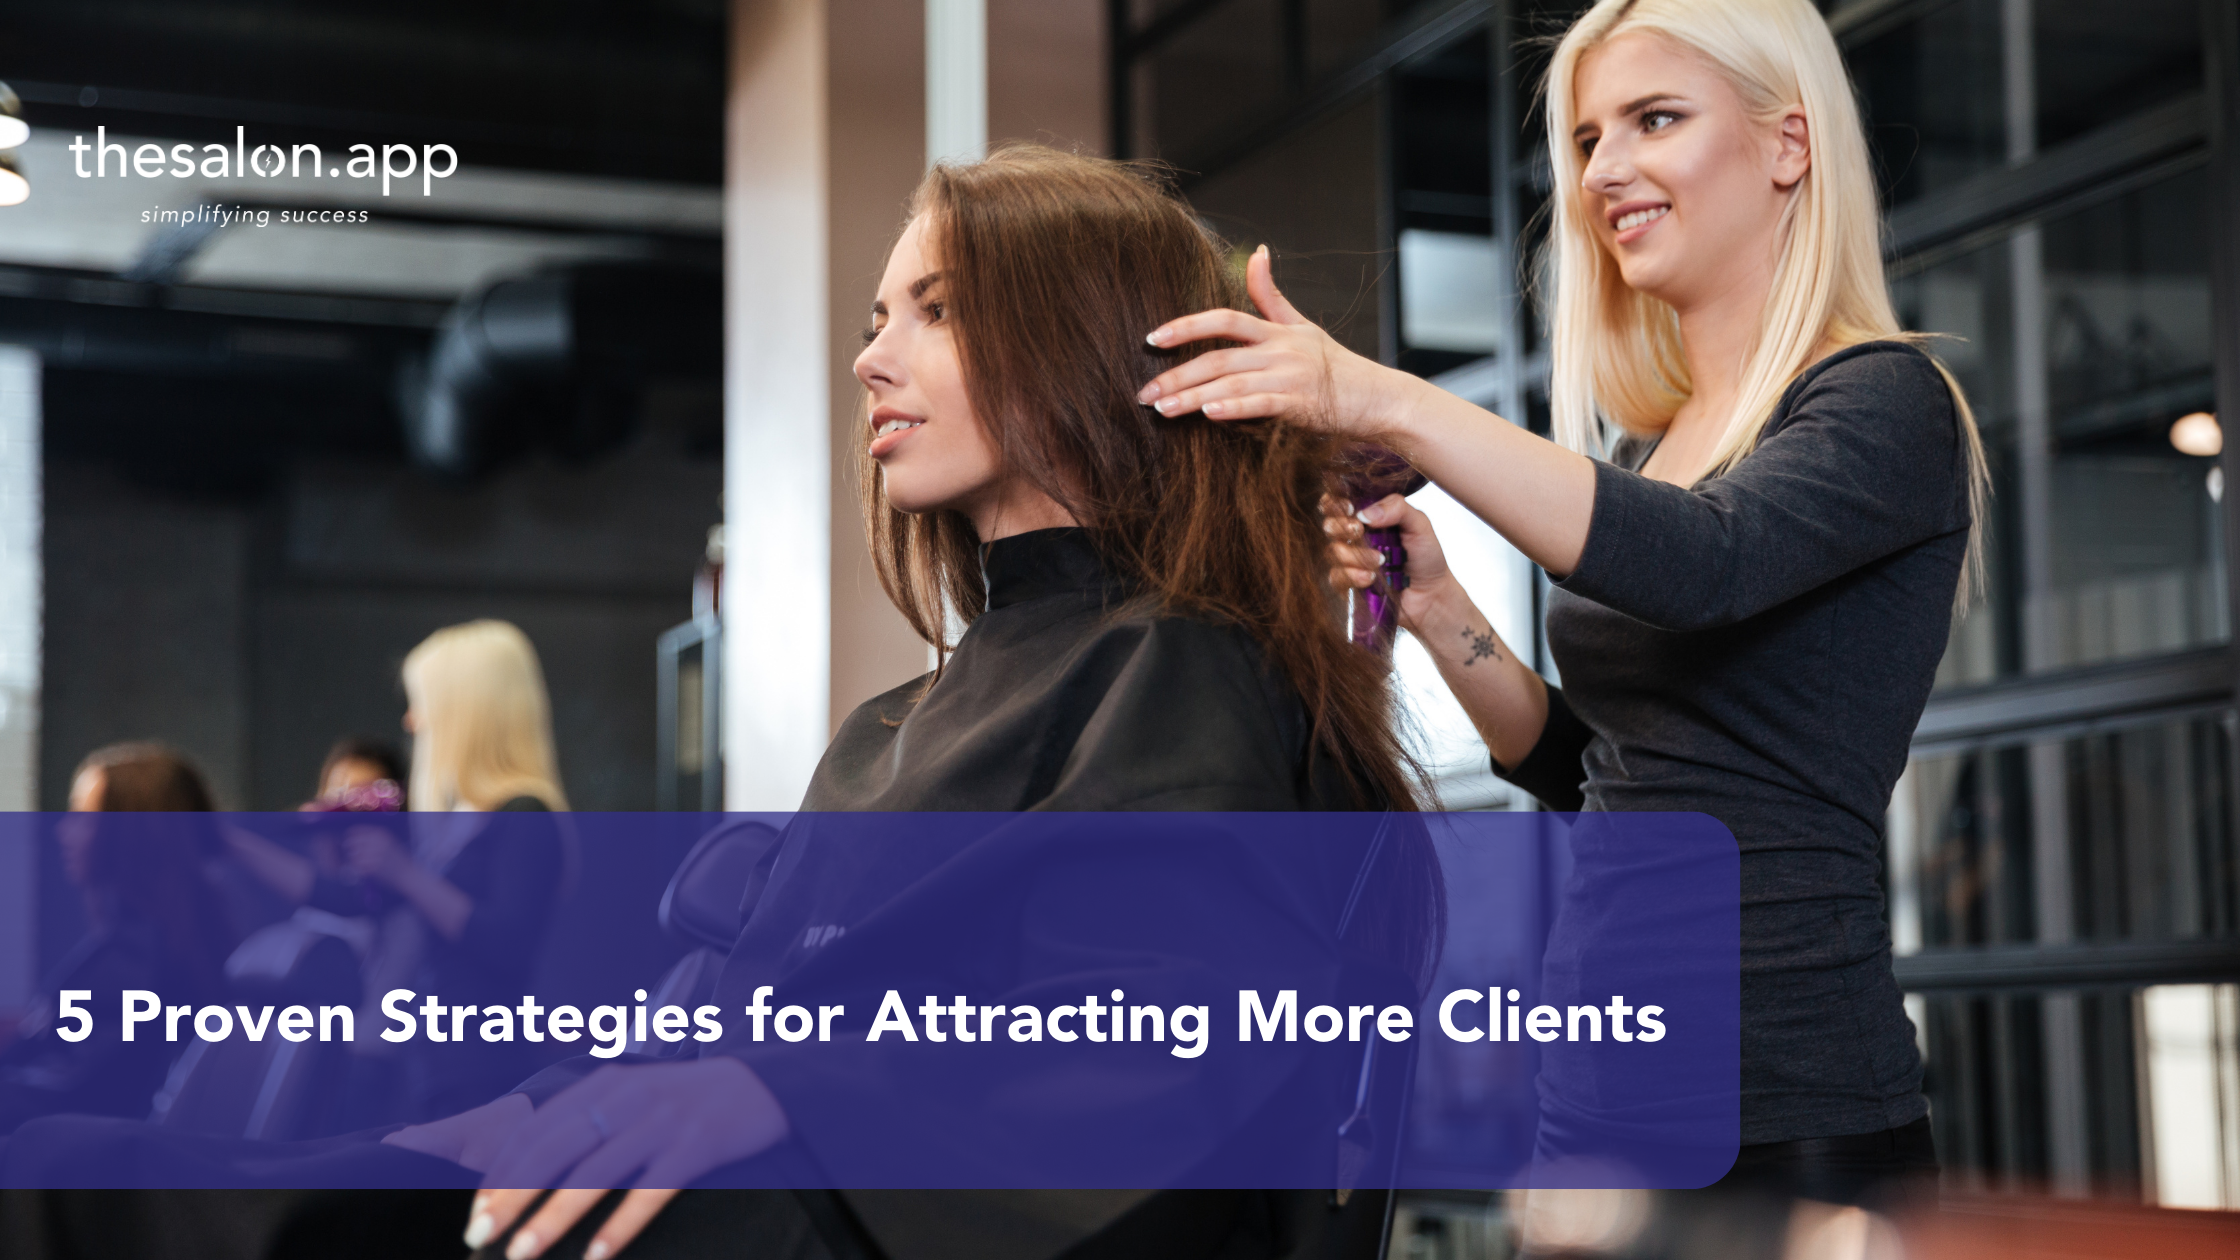 5 proven strategies for attracting more clients to your hair salon